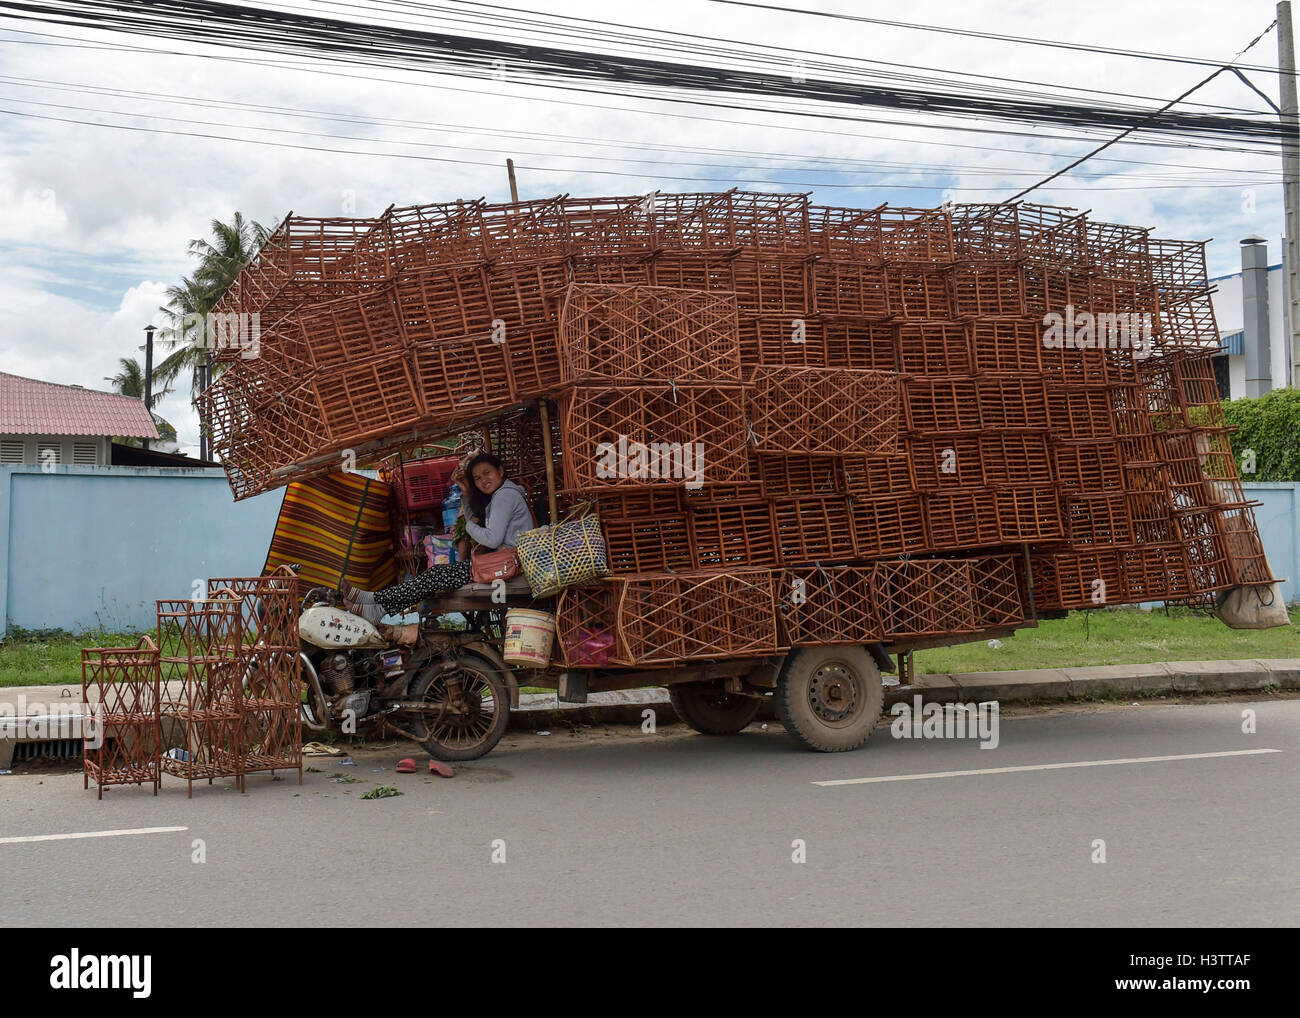 Motorcycle with fully loaded trailer, loaded with shelves, Phnom Penh, Cambodia Stock Photo